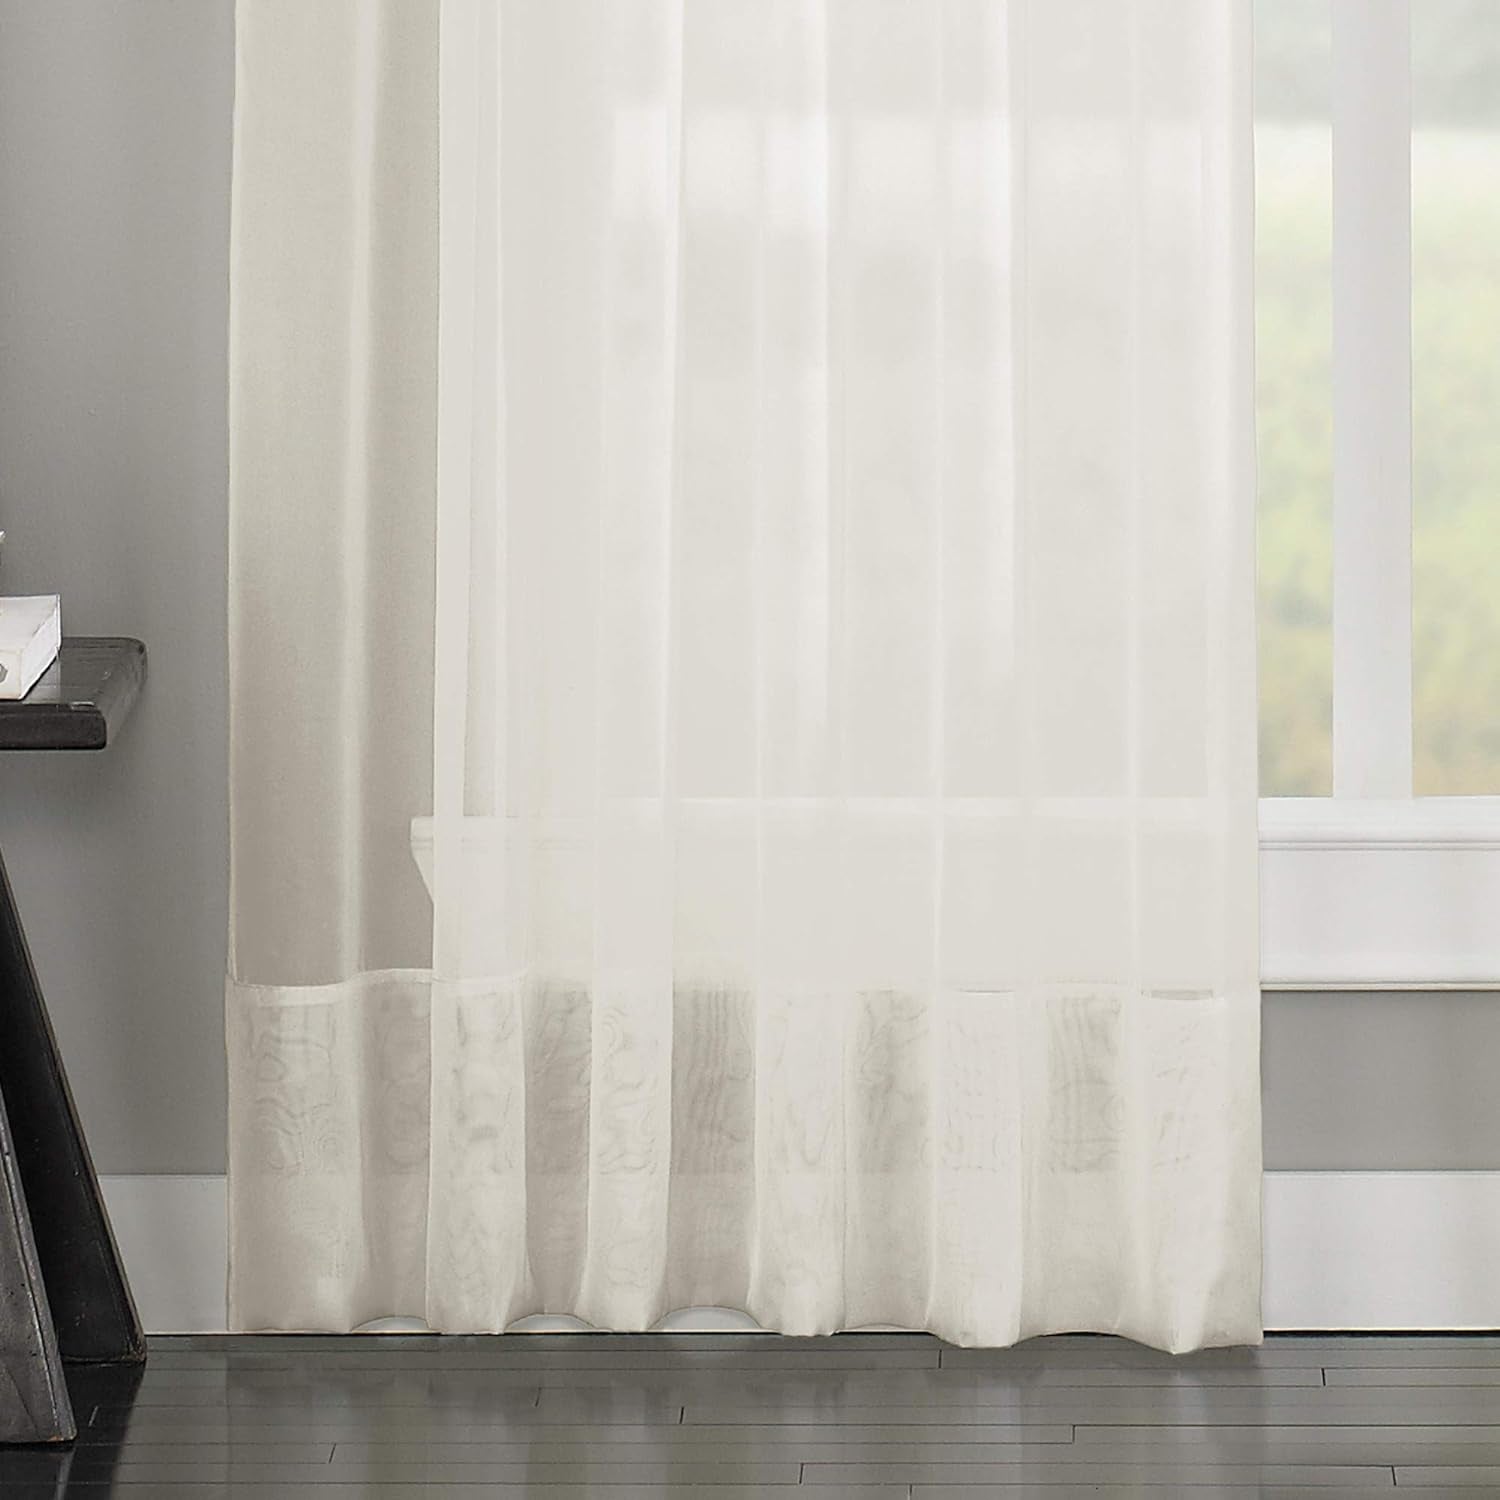 Curtainworks Soho Voile Sheer Pinch Pleat Curtain Panel, 29 by 63", Oyster  CHF Industries   